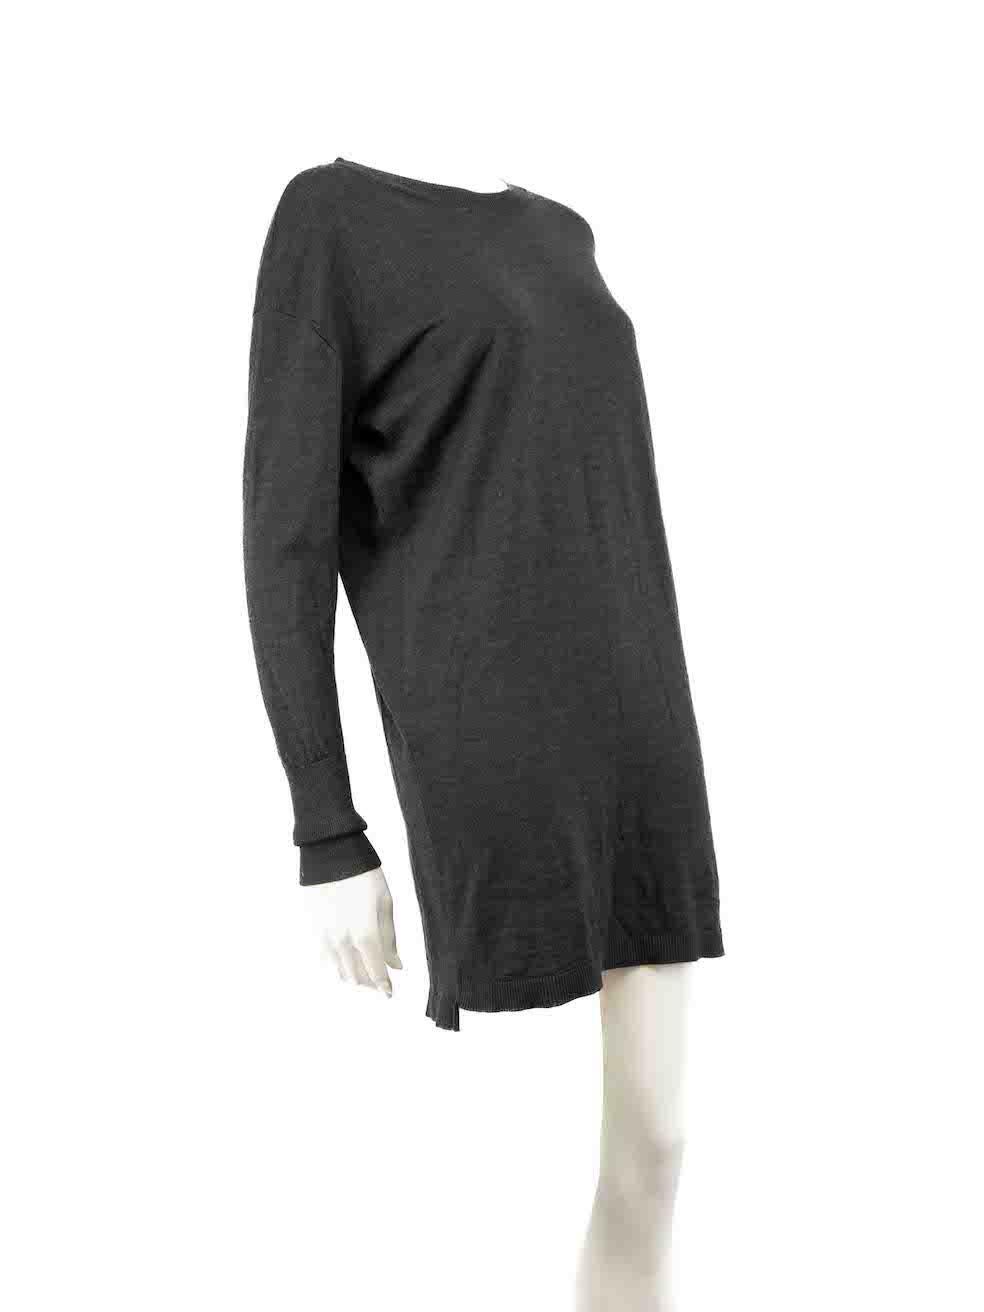 CONDITION is Very good. Hardly any visible wear to knit is evident on this used Acne designer resale item.
 
 
 
 Details
 
 
 Grey
 
 Wool
 
 Mini knit dress
 
 Long sleeves
 
 Round neckline
 
 Knitted and stretchy
 
 
 
 
 
 Made in Italy
 
 
 
